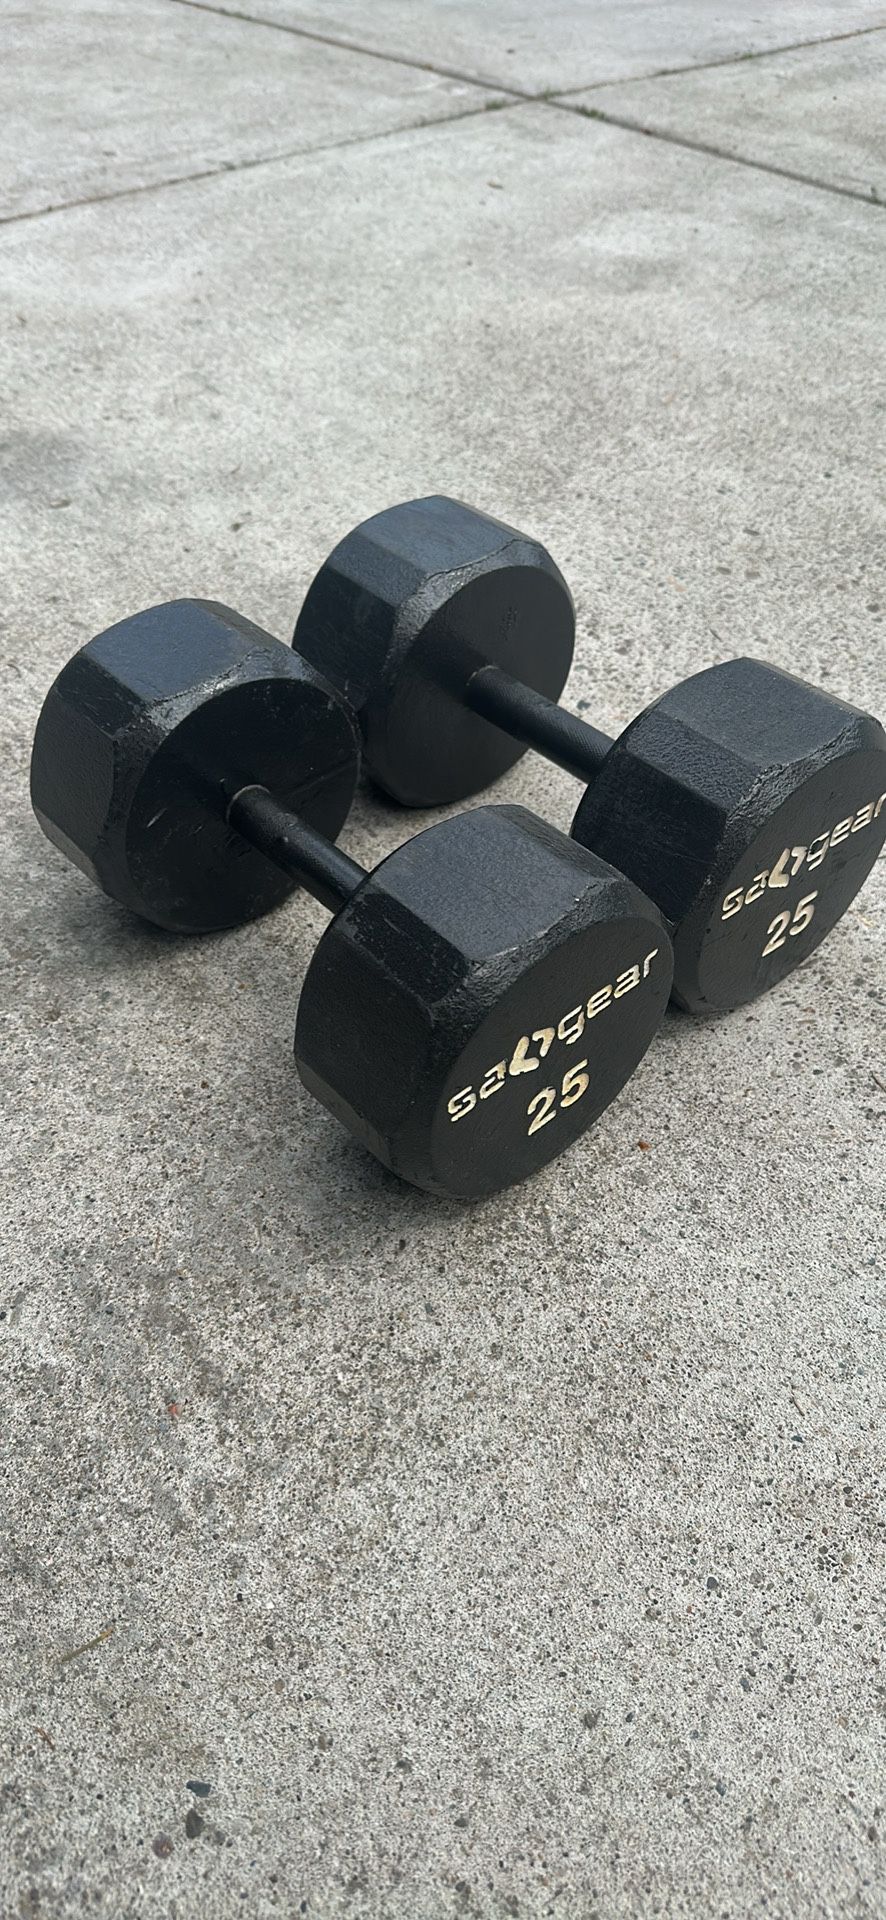 A Pair Of 25lbs Dumbbells 